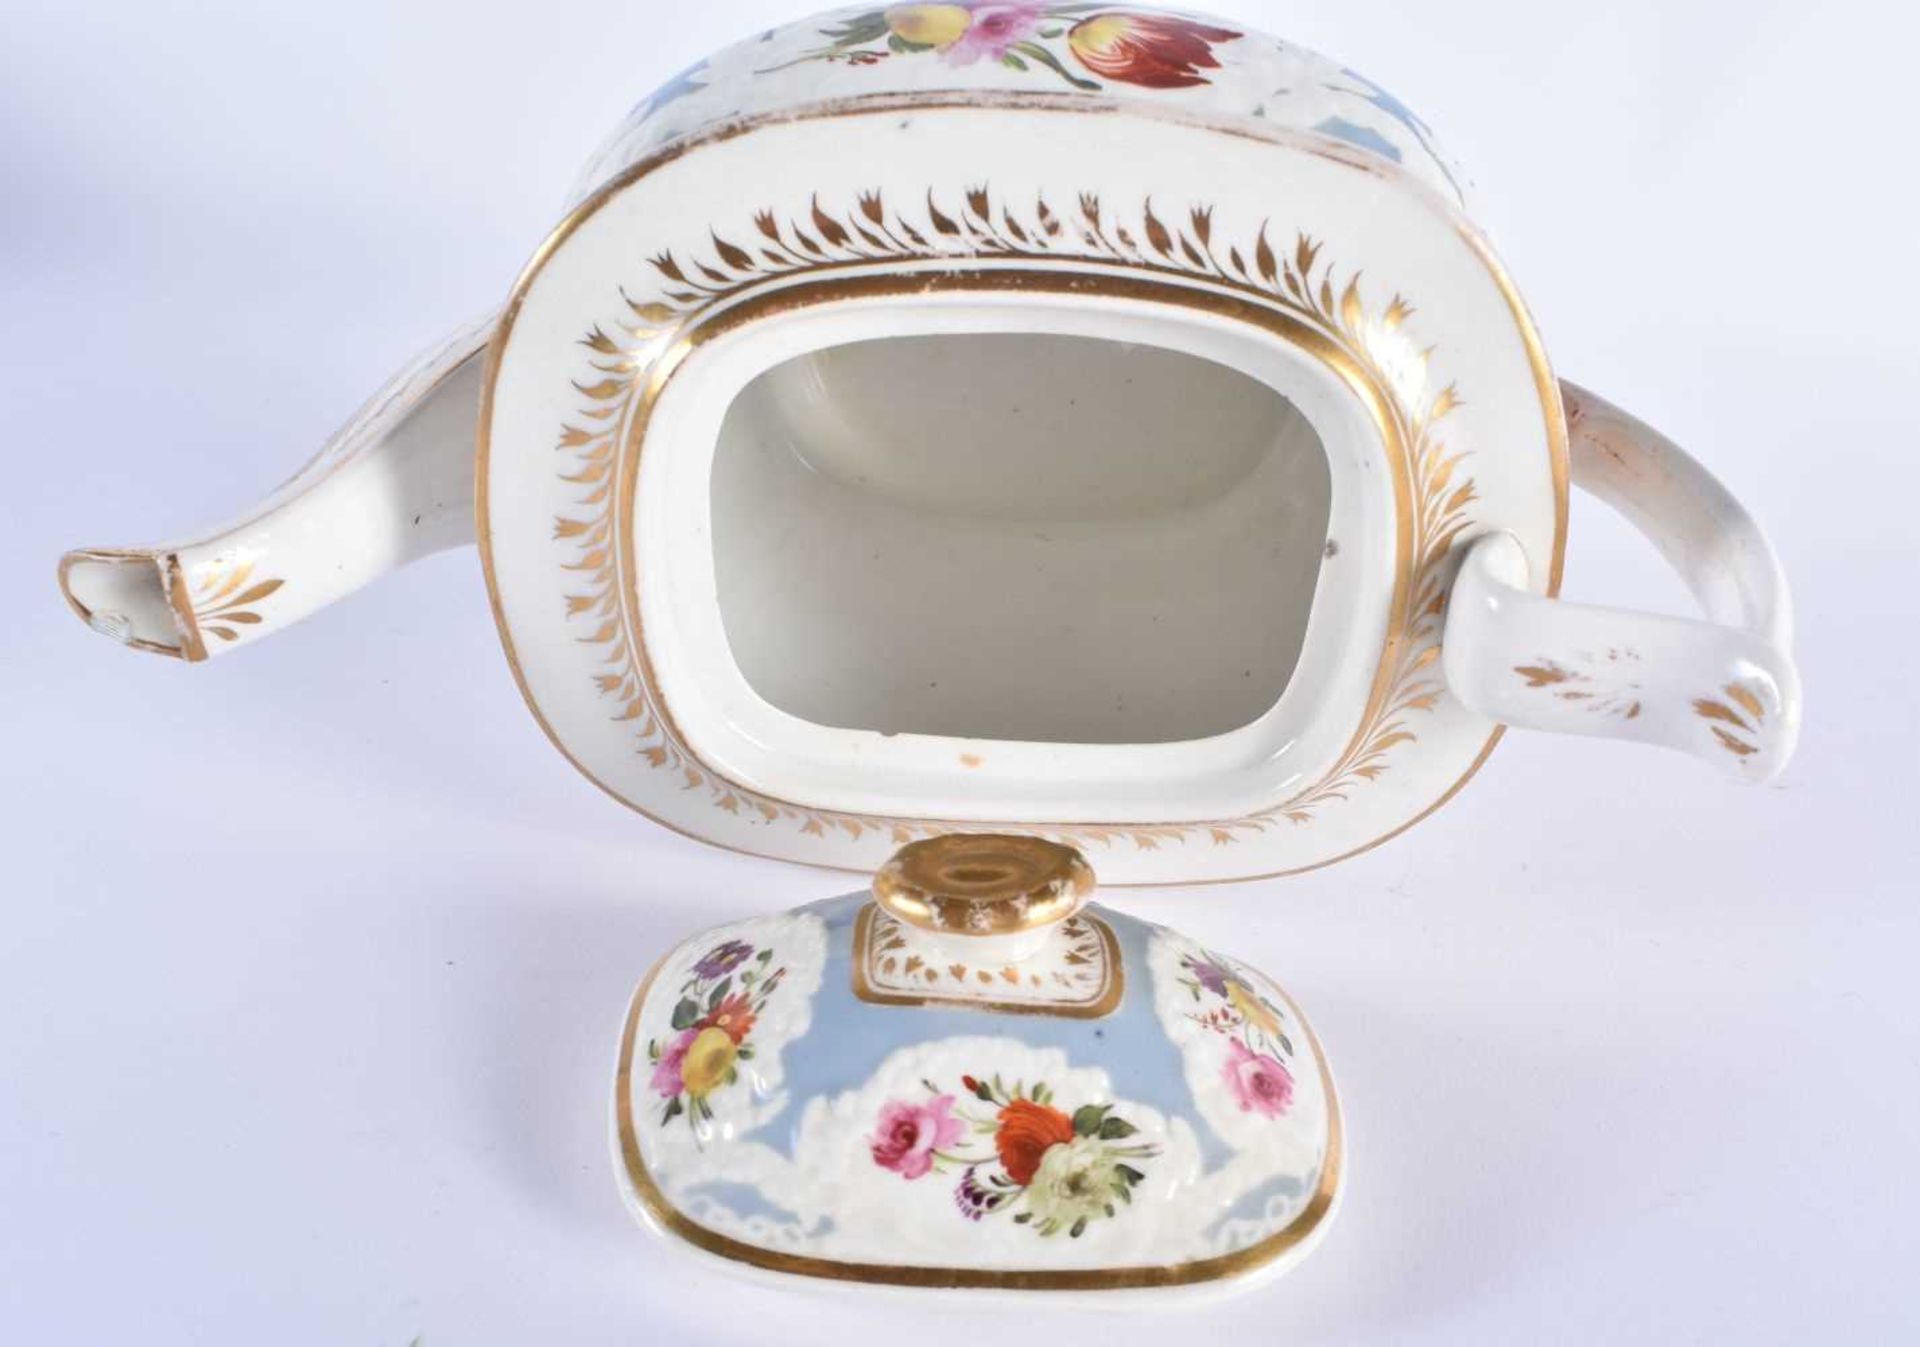 AN EARLY 19TH CENTURY CHAMBERLAINS WORCESTER PART TEASET painted with floral sprays, under a moulded - Image 12 of 36